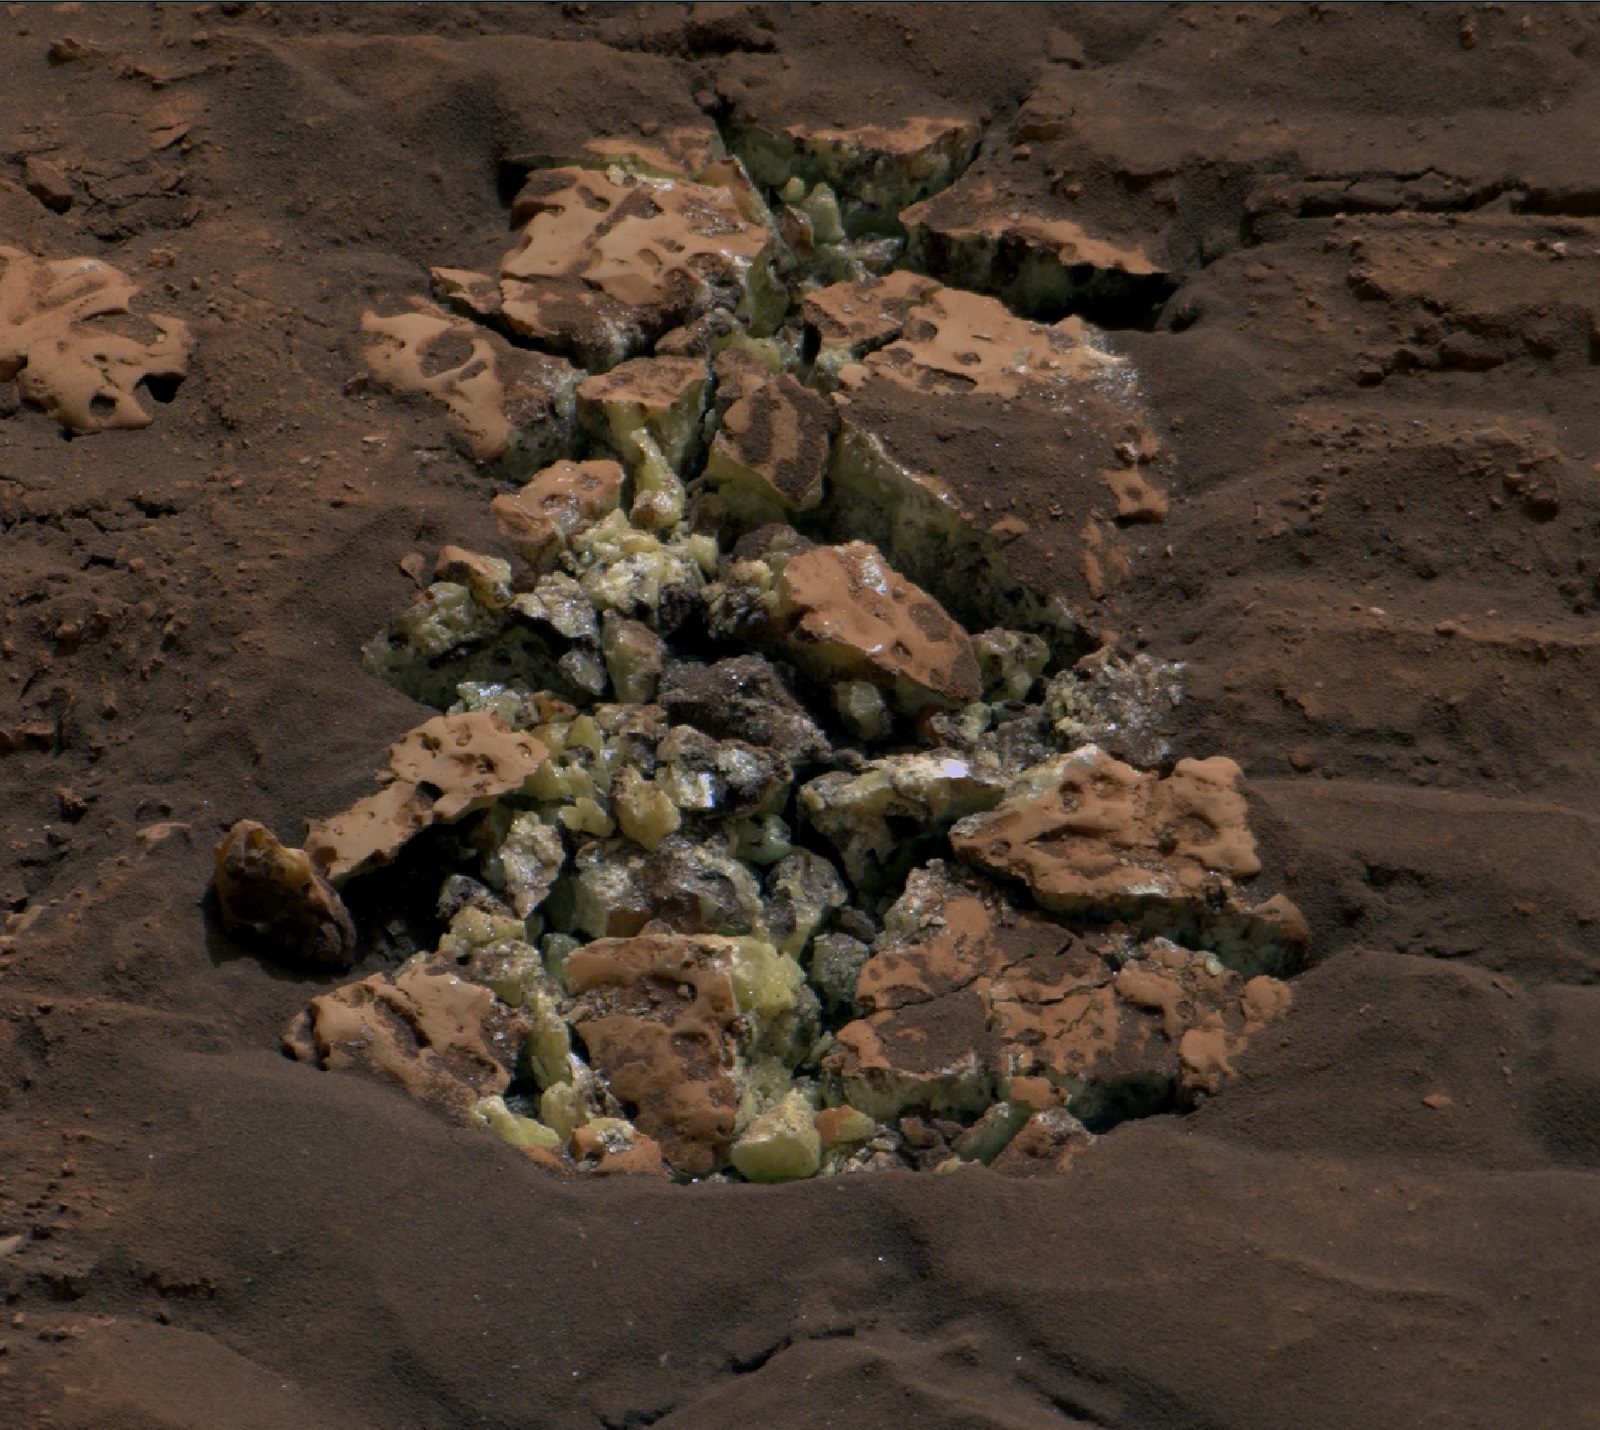 The Mars rover broke the rock there. “It’s like finding an oasis in the desert.”